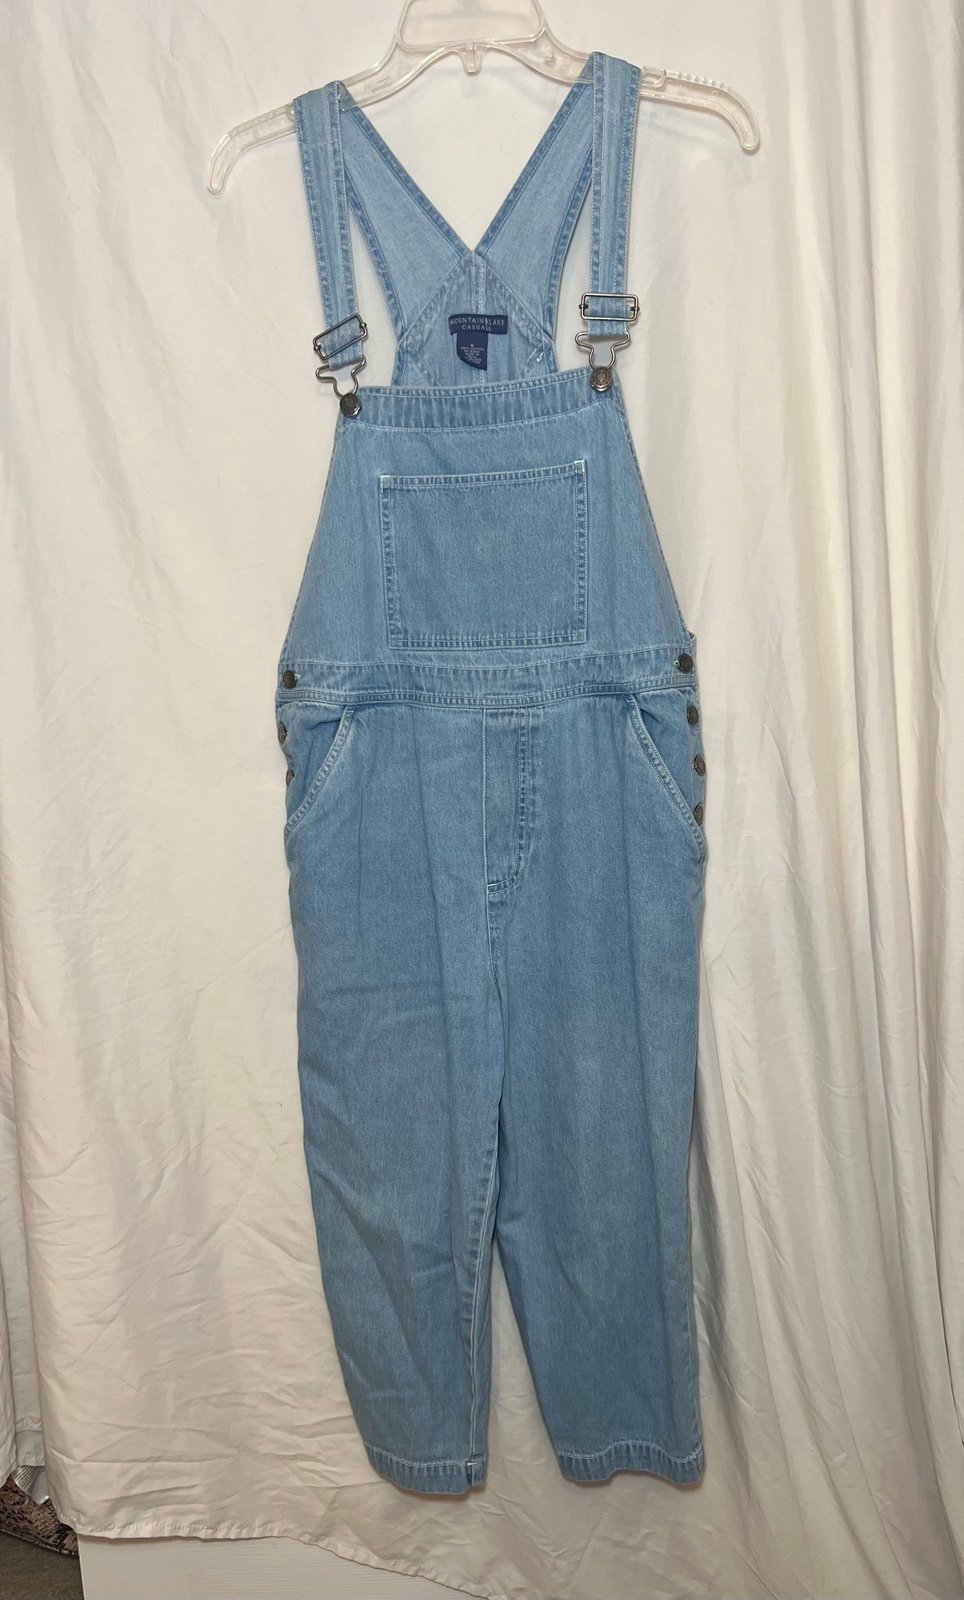 Vintage Denim Overalls - From the 90’s - EUC - 100% Cot